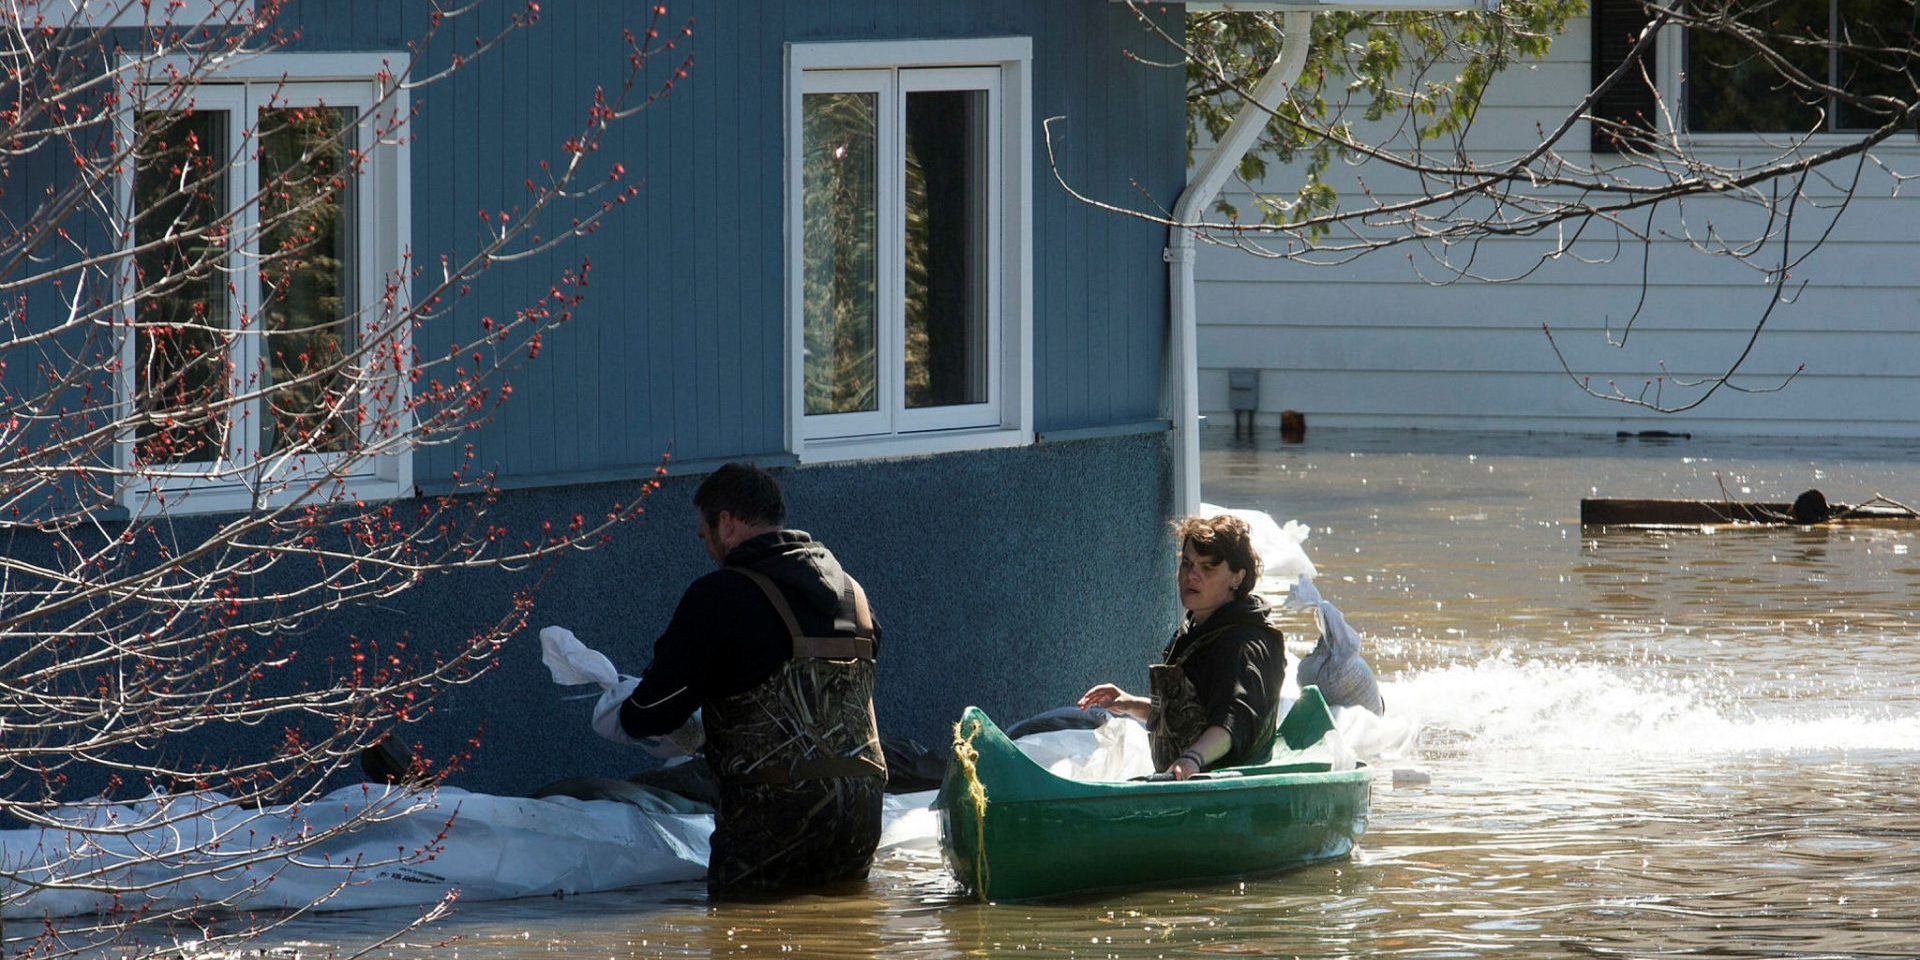 Homeowners shore up sandbags around a property at Constance Bay  on Apr. 30, 2019. Residents have battled record water levels along the Ottawa River Valley resulting in unprecedented flood damage. Andrew Meade